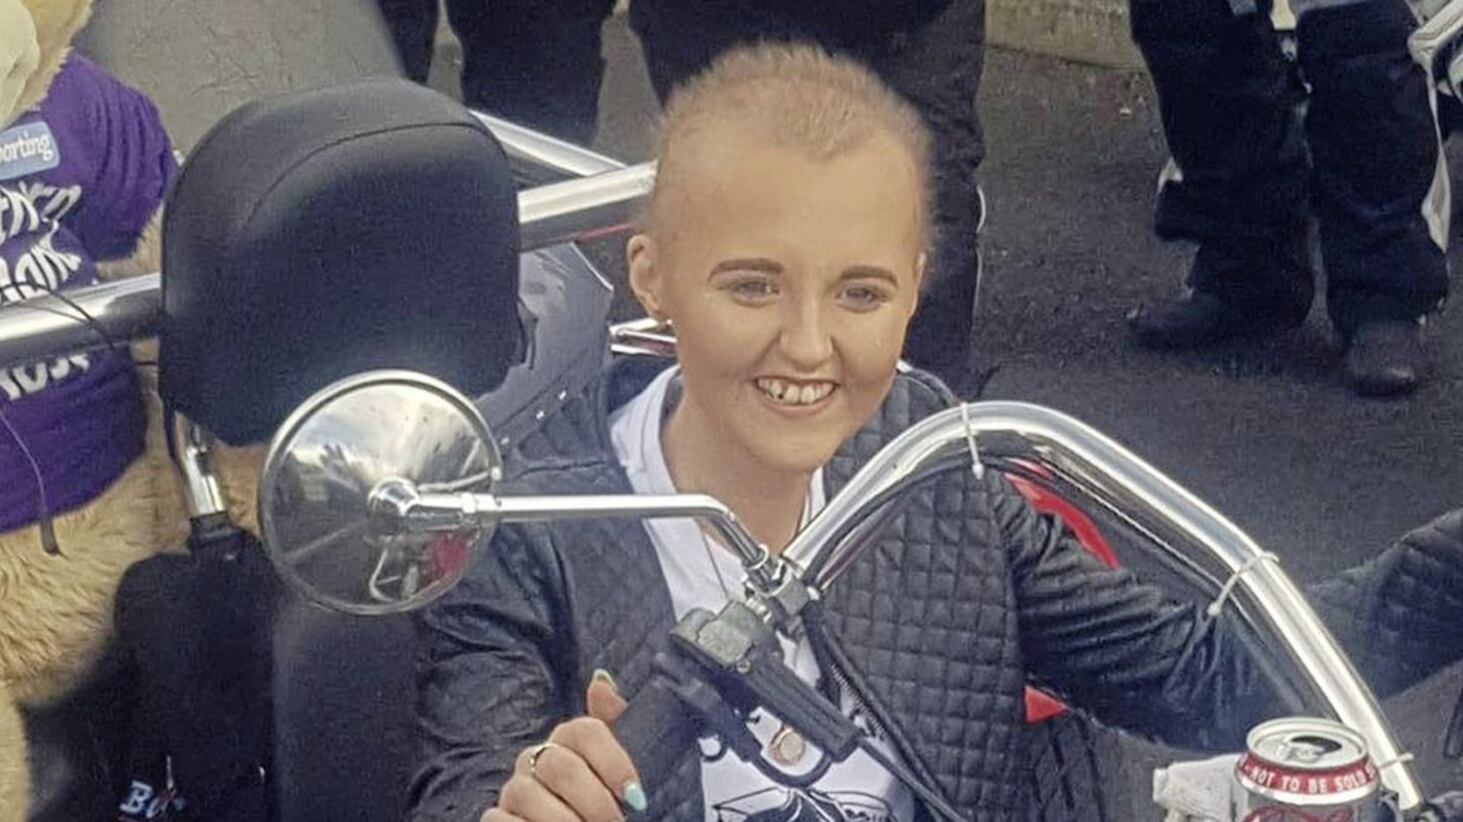 North west bikers took motorbike enthusiast Alexandra Johnston on a surprise trip in 2016 